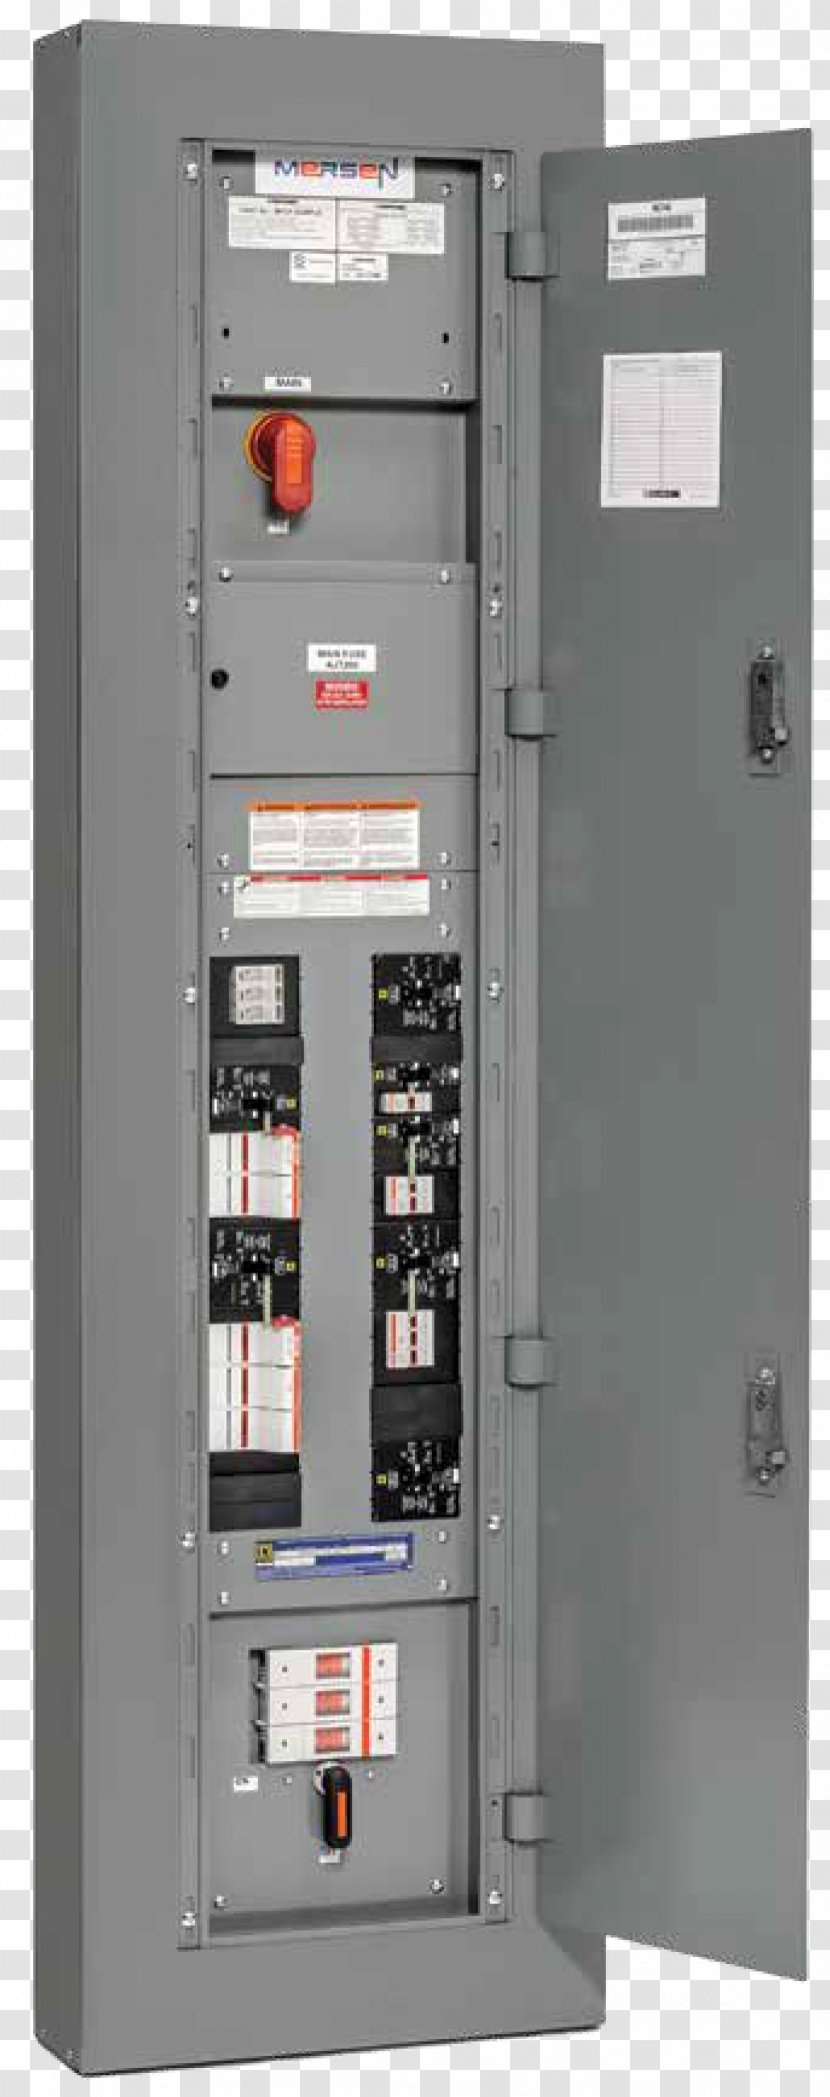 Circuit Breaker Electrical Wires & Cable Wiring Diagram - Electricity - Panel Electric Transparent PNG